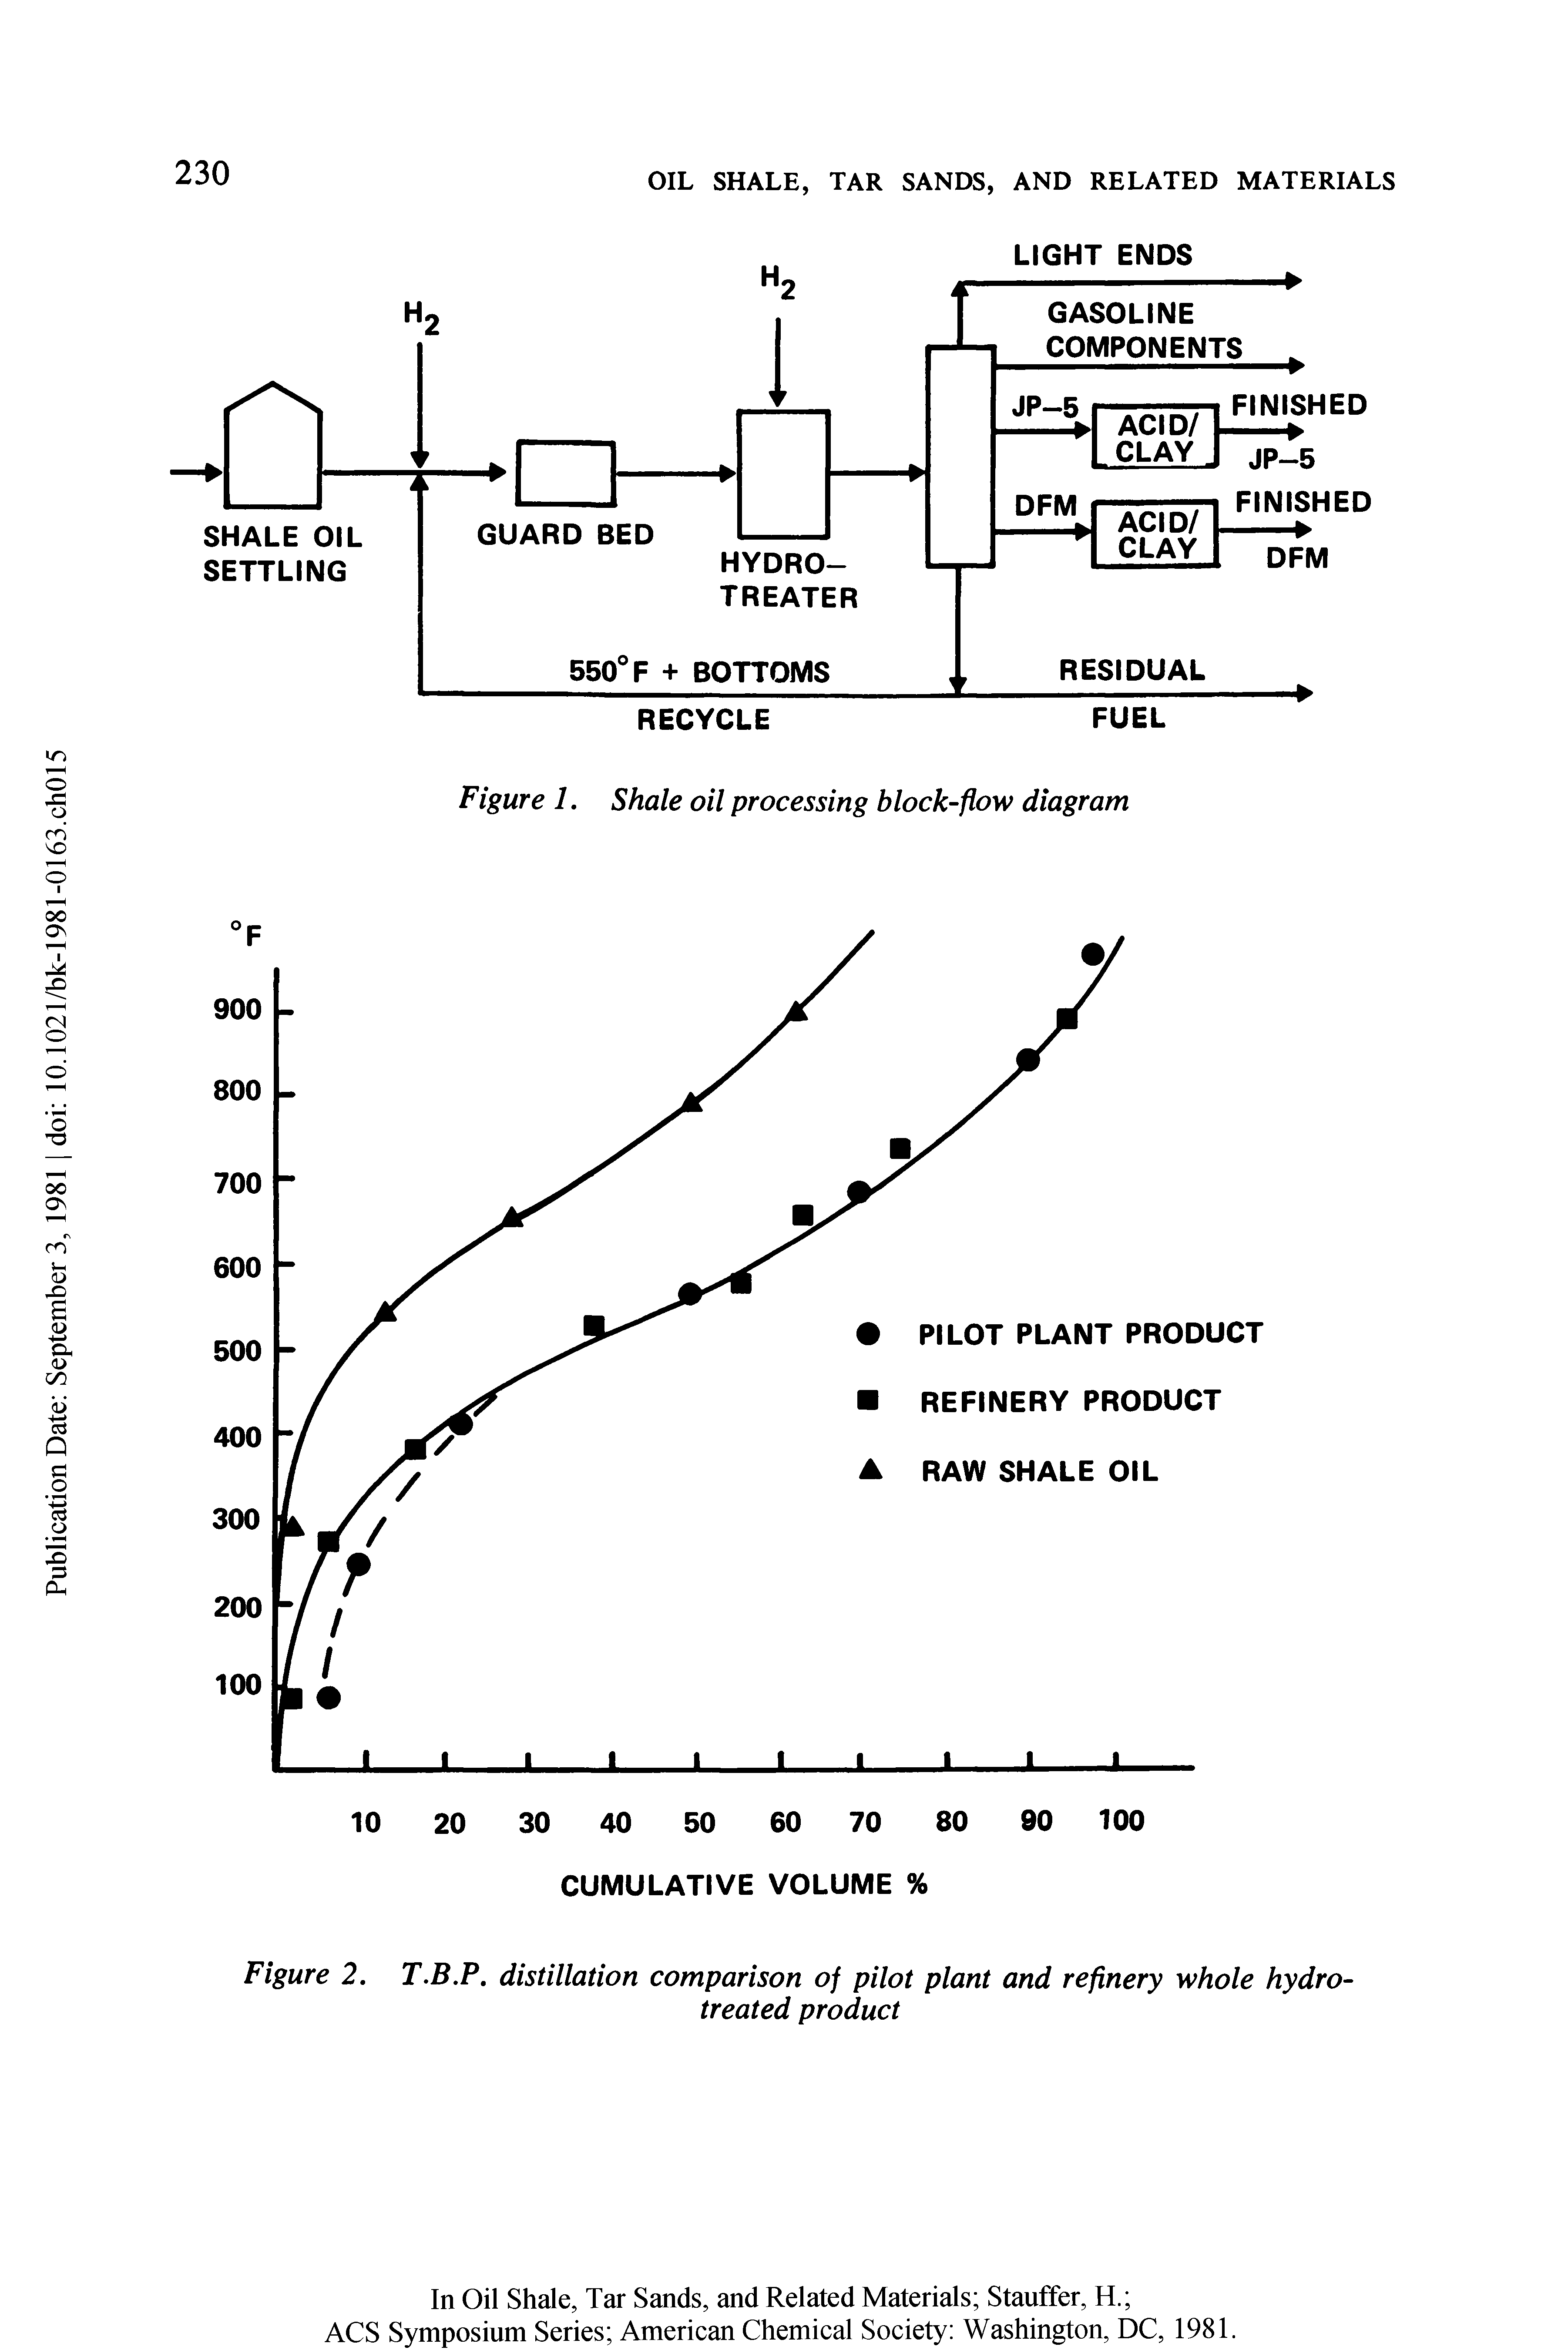 Figure 2. T.B.P. distillation comparison of pilot plant and refinery whole hydrotreated product...